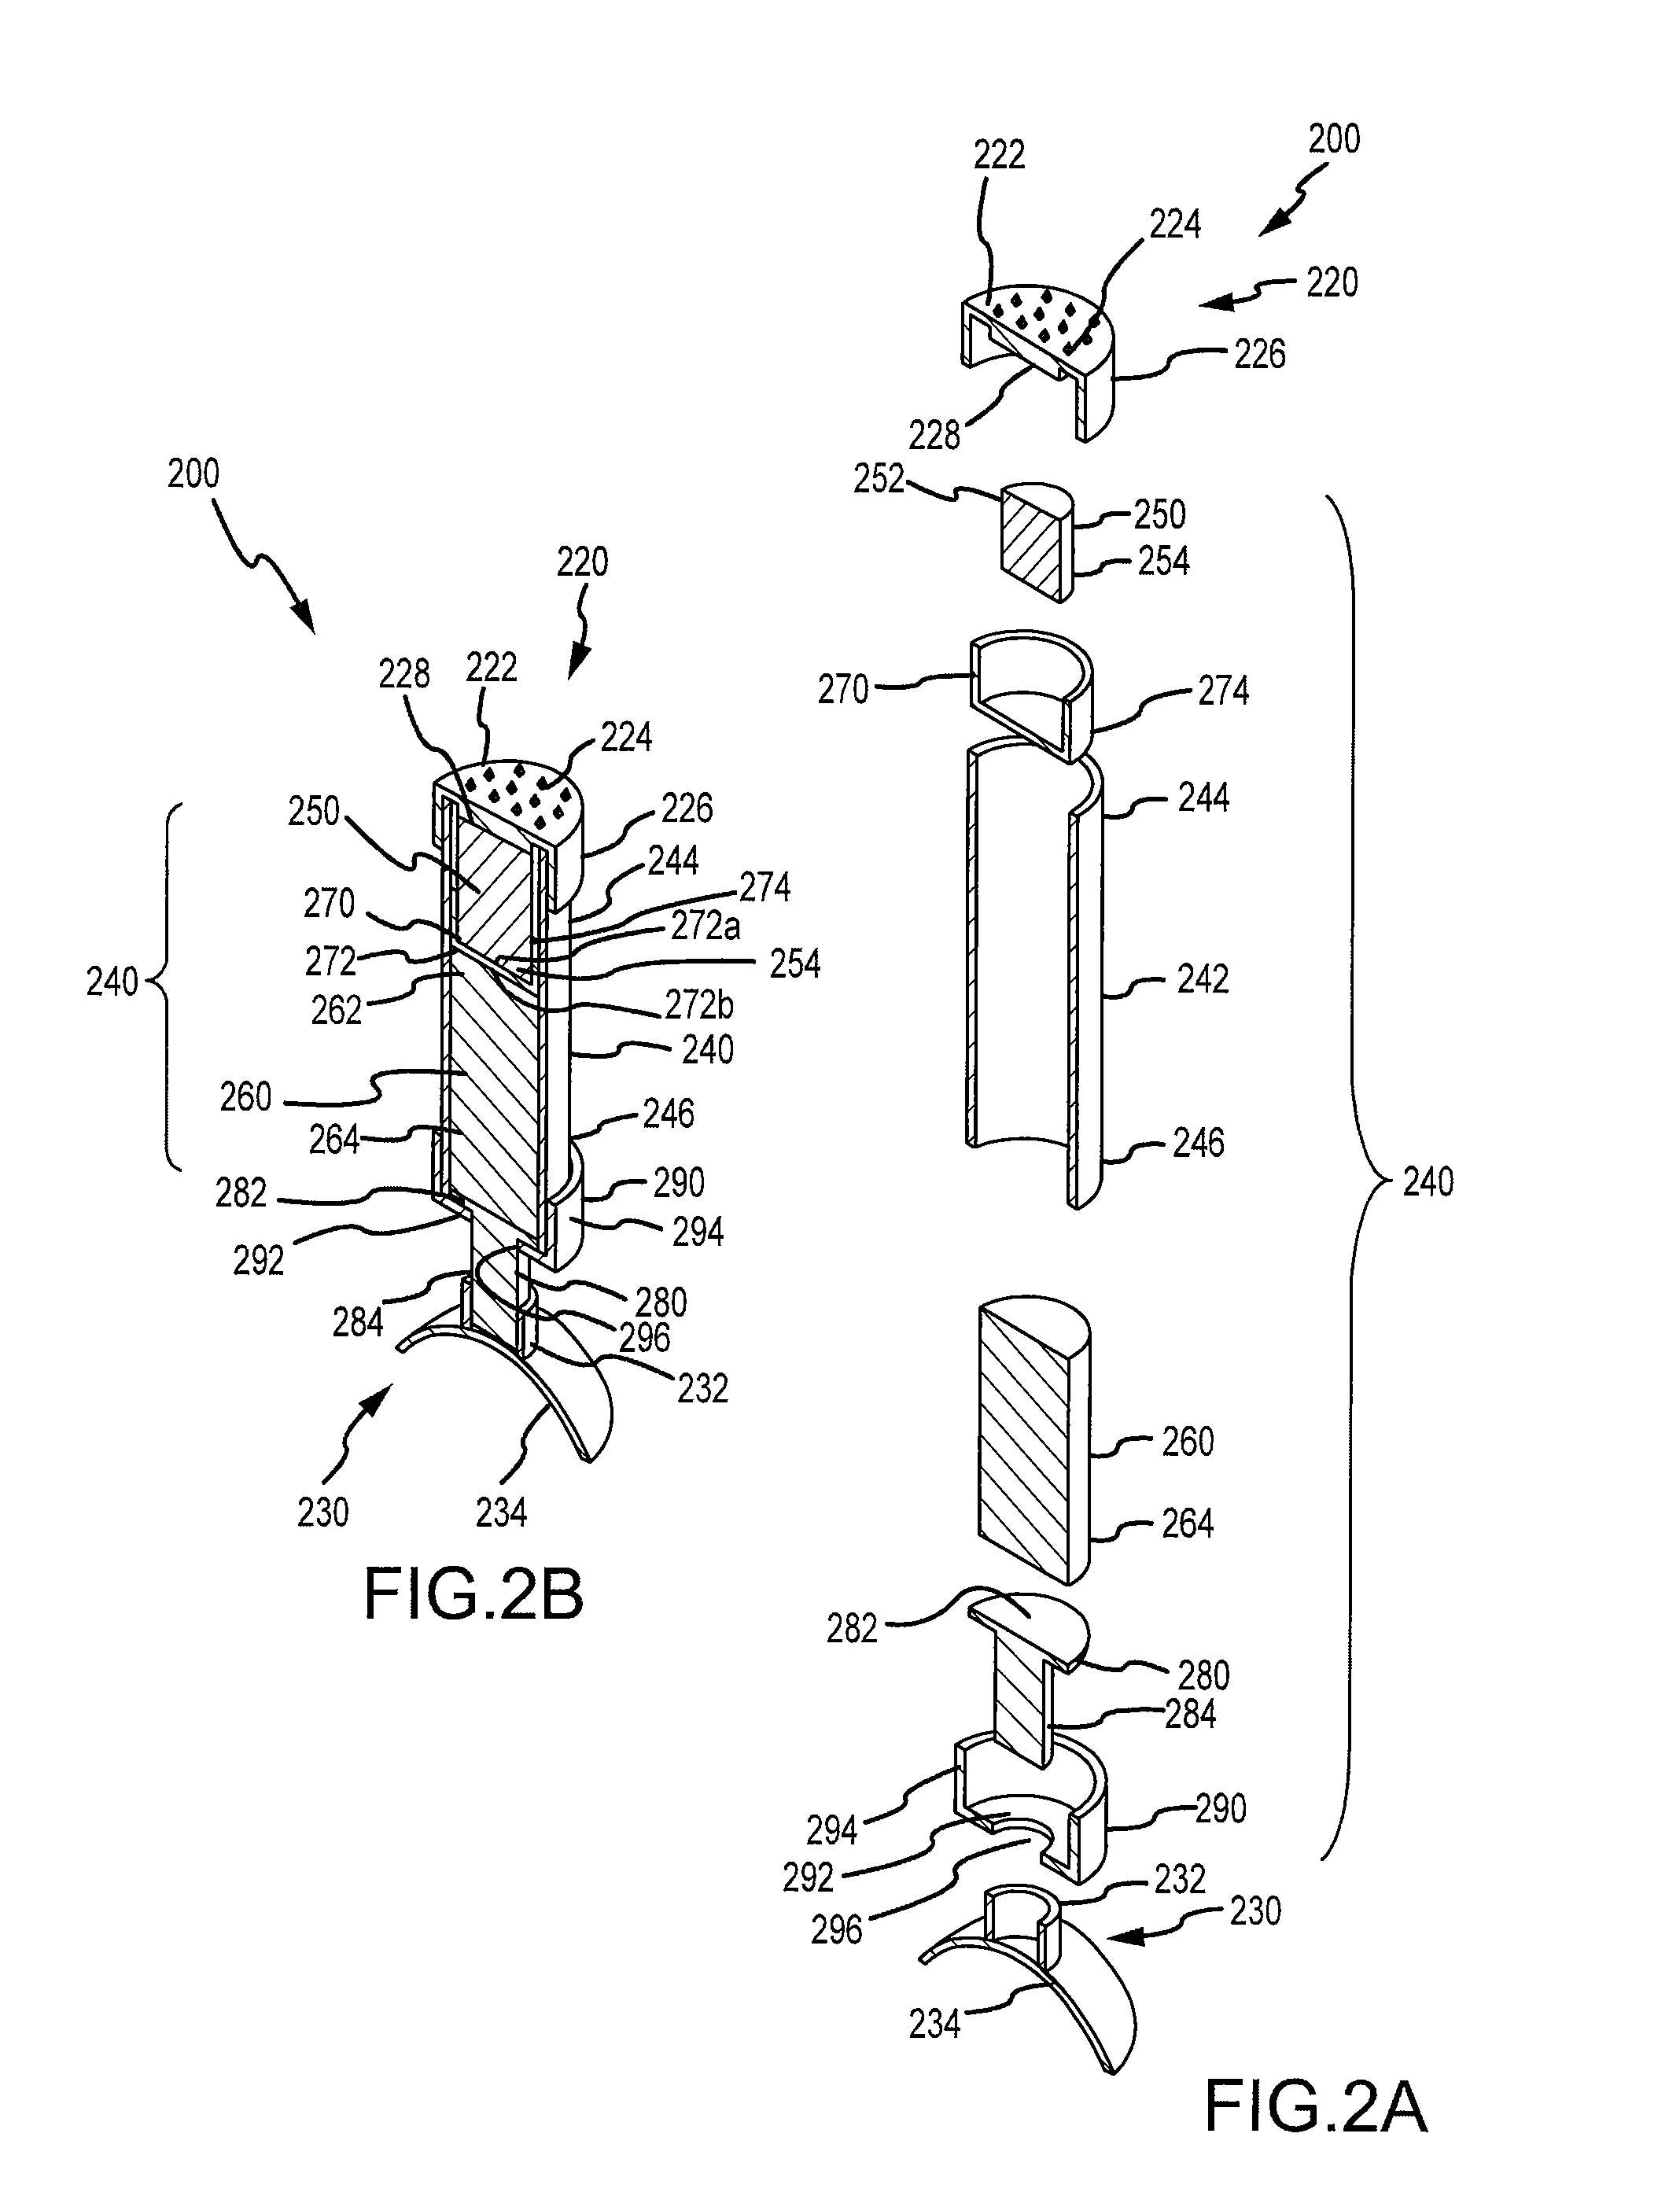 Suspension protection systems and methods